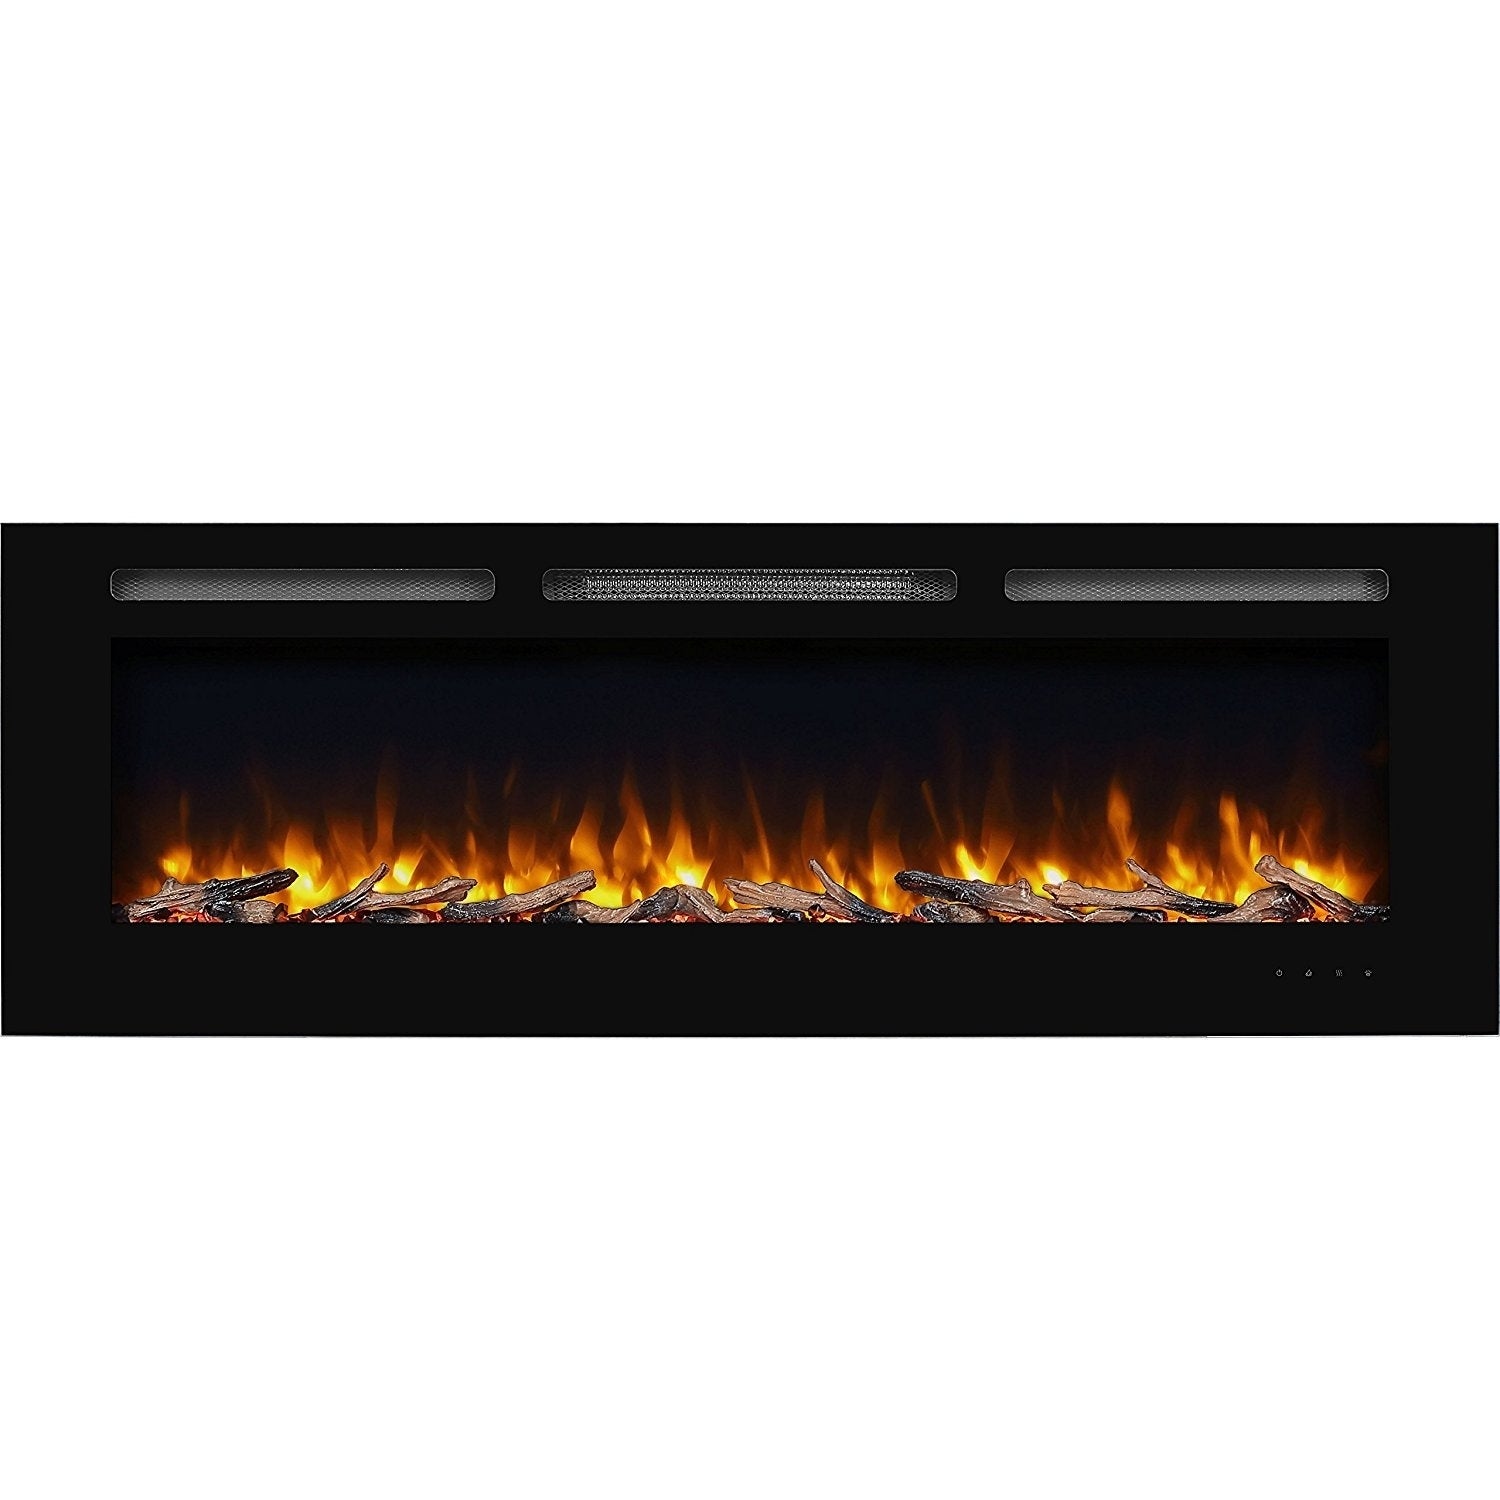 Led Fireplace Wall Mount Awesome 60" Alice In Wall Recessed Electric Fireplace 1500w Black